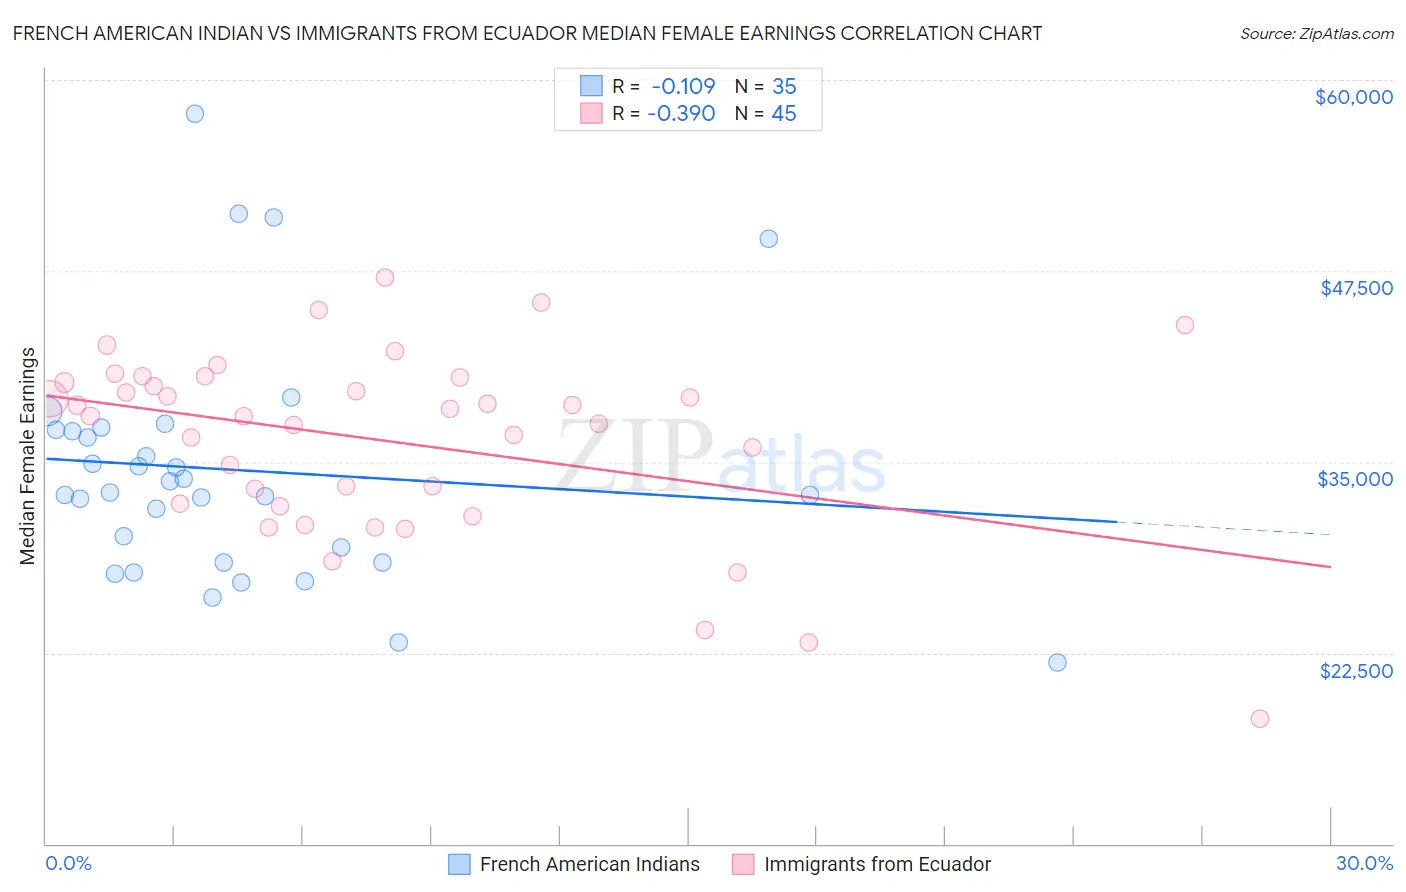 French American Indian vs Immigrants from Ecuador Median Female Earnings